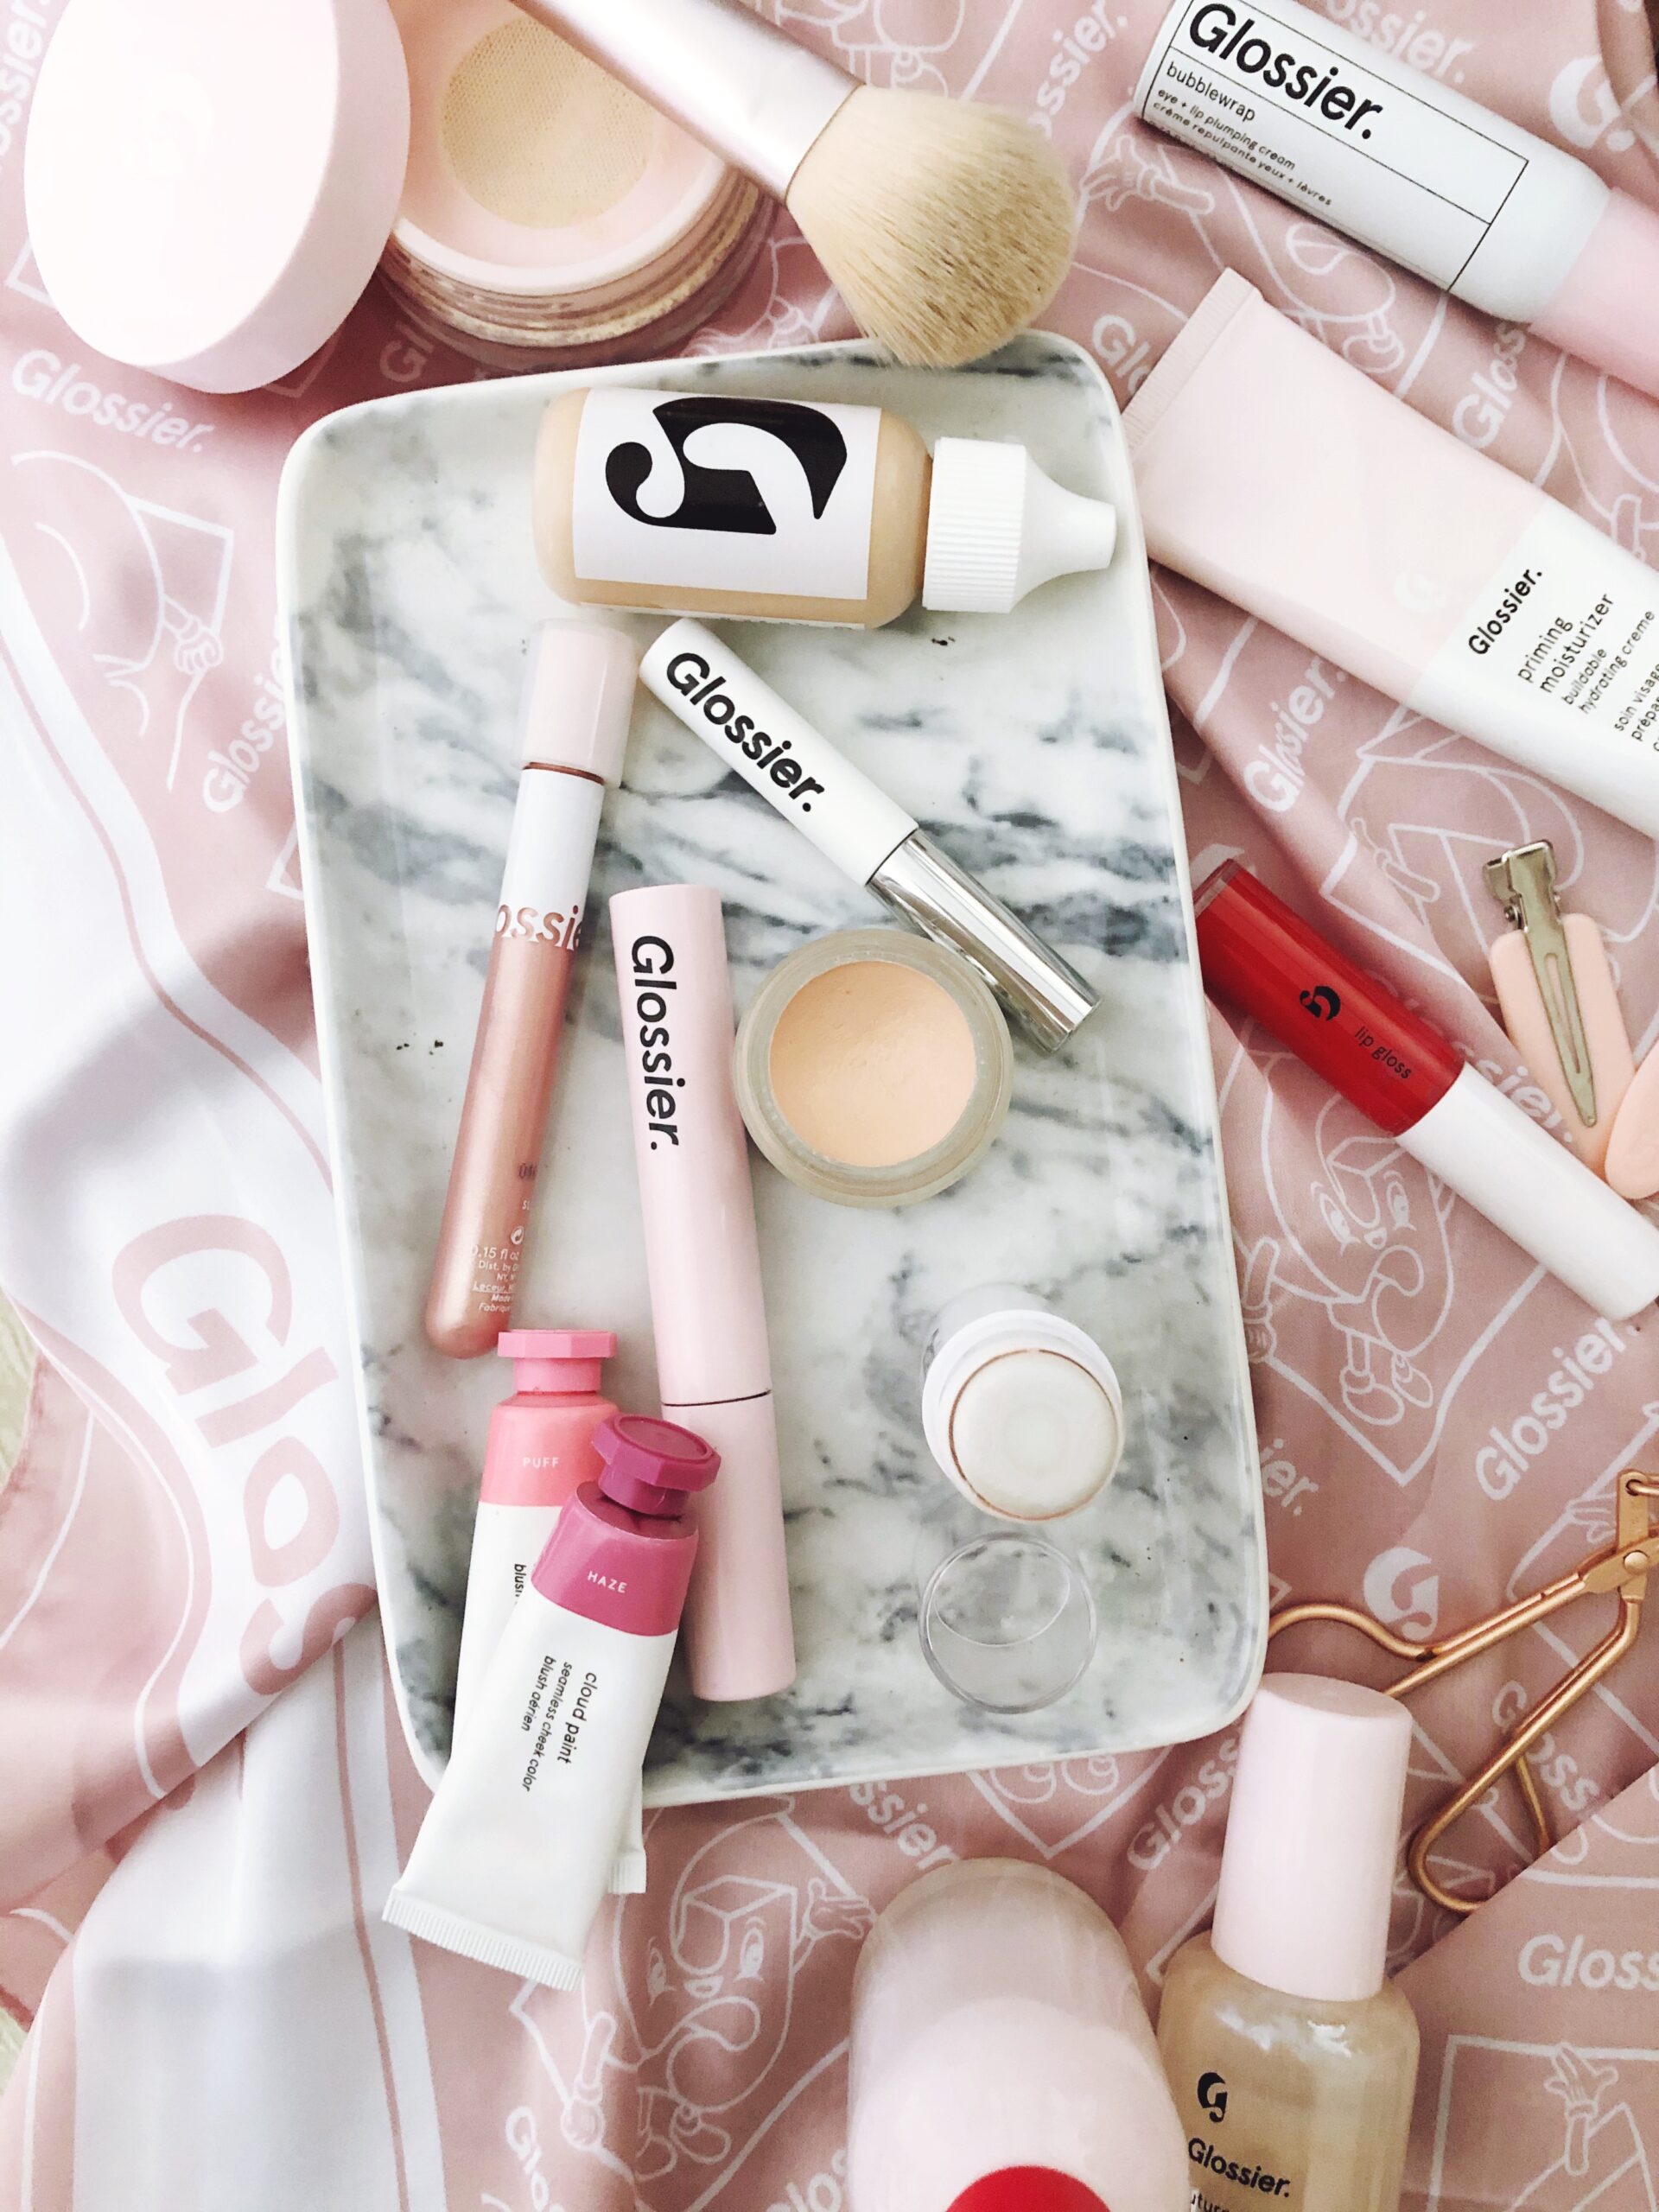 Glossier Makeup Look for Valentine's Day